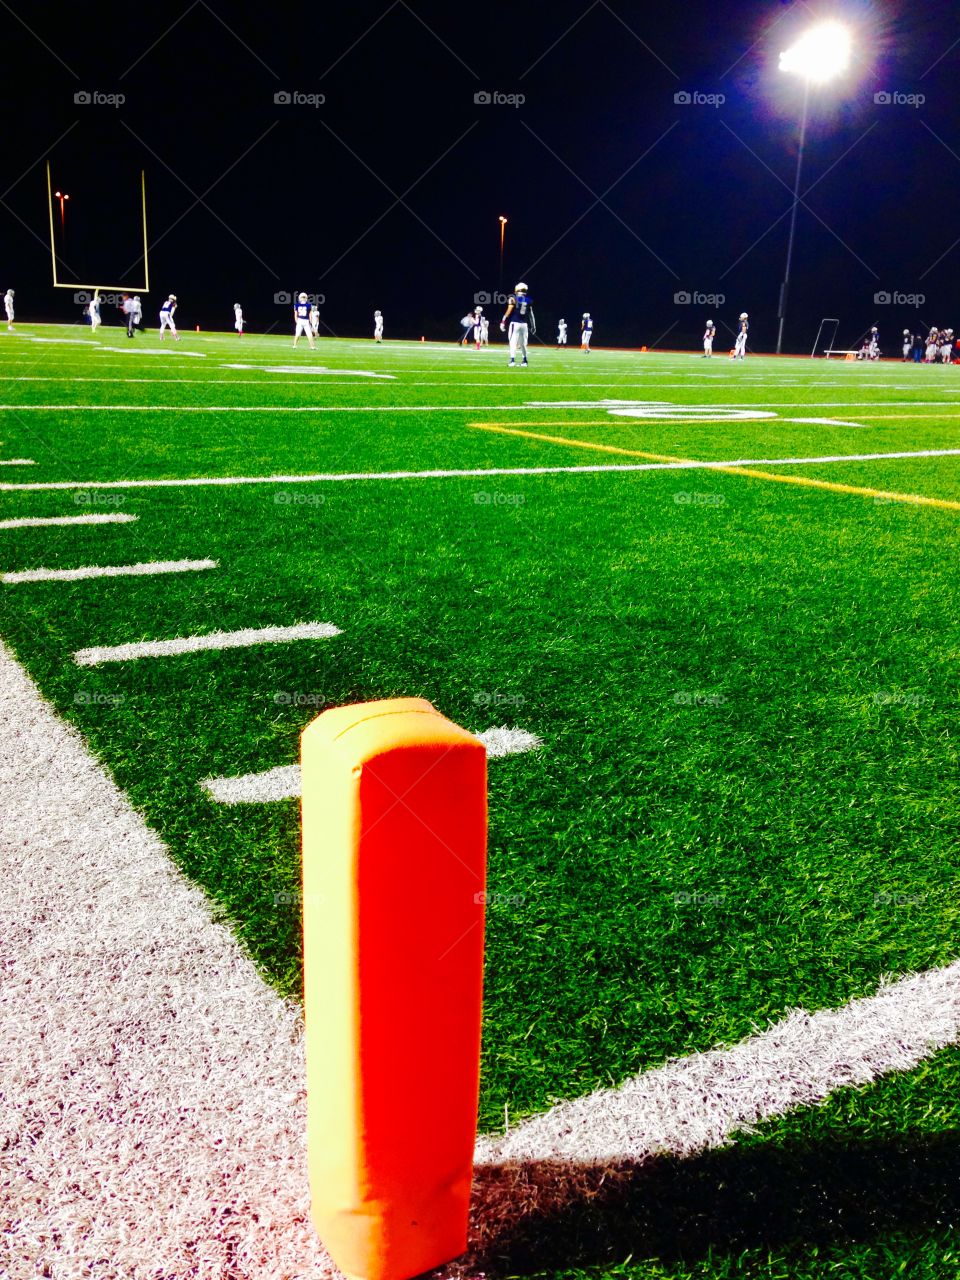 Football Field Player View. Endzone perspective of a high school football game 